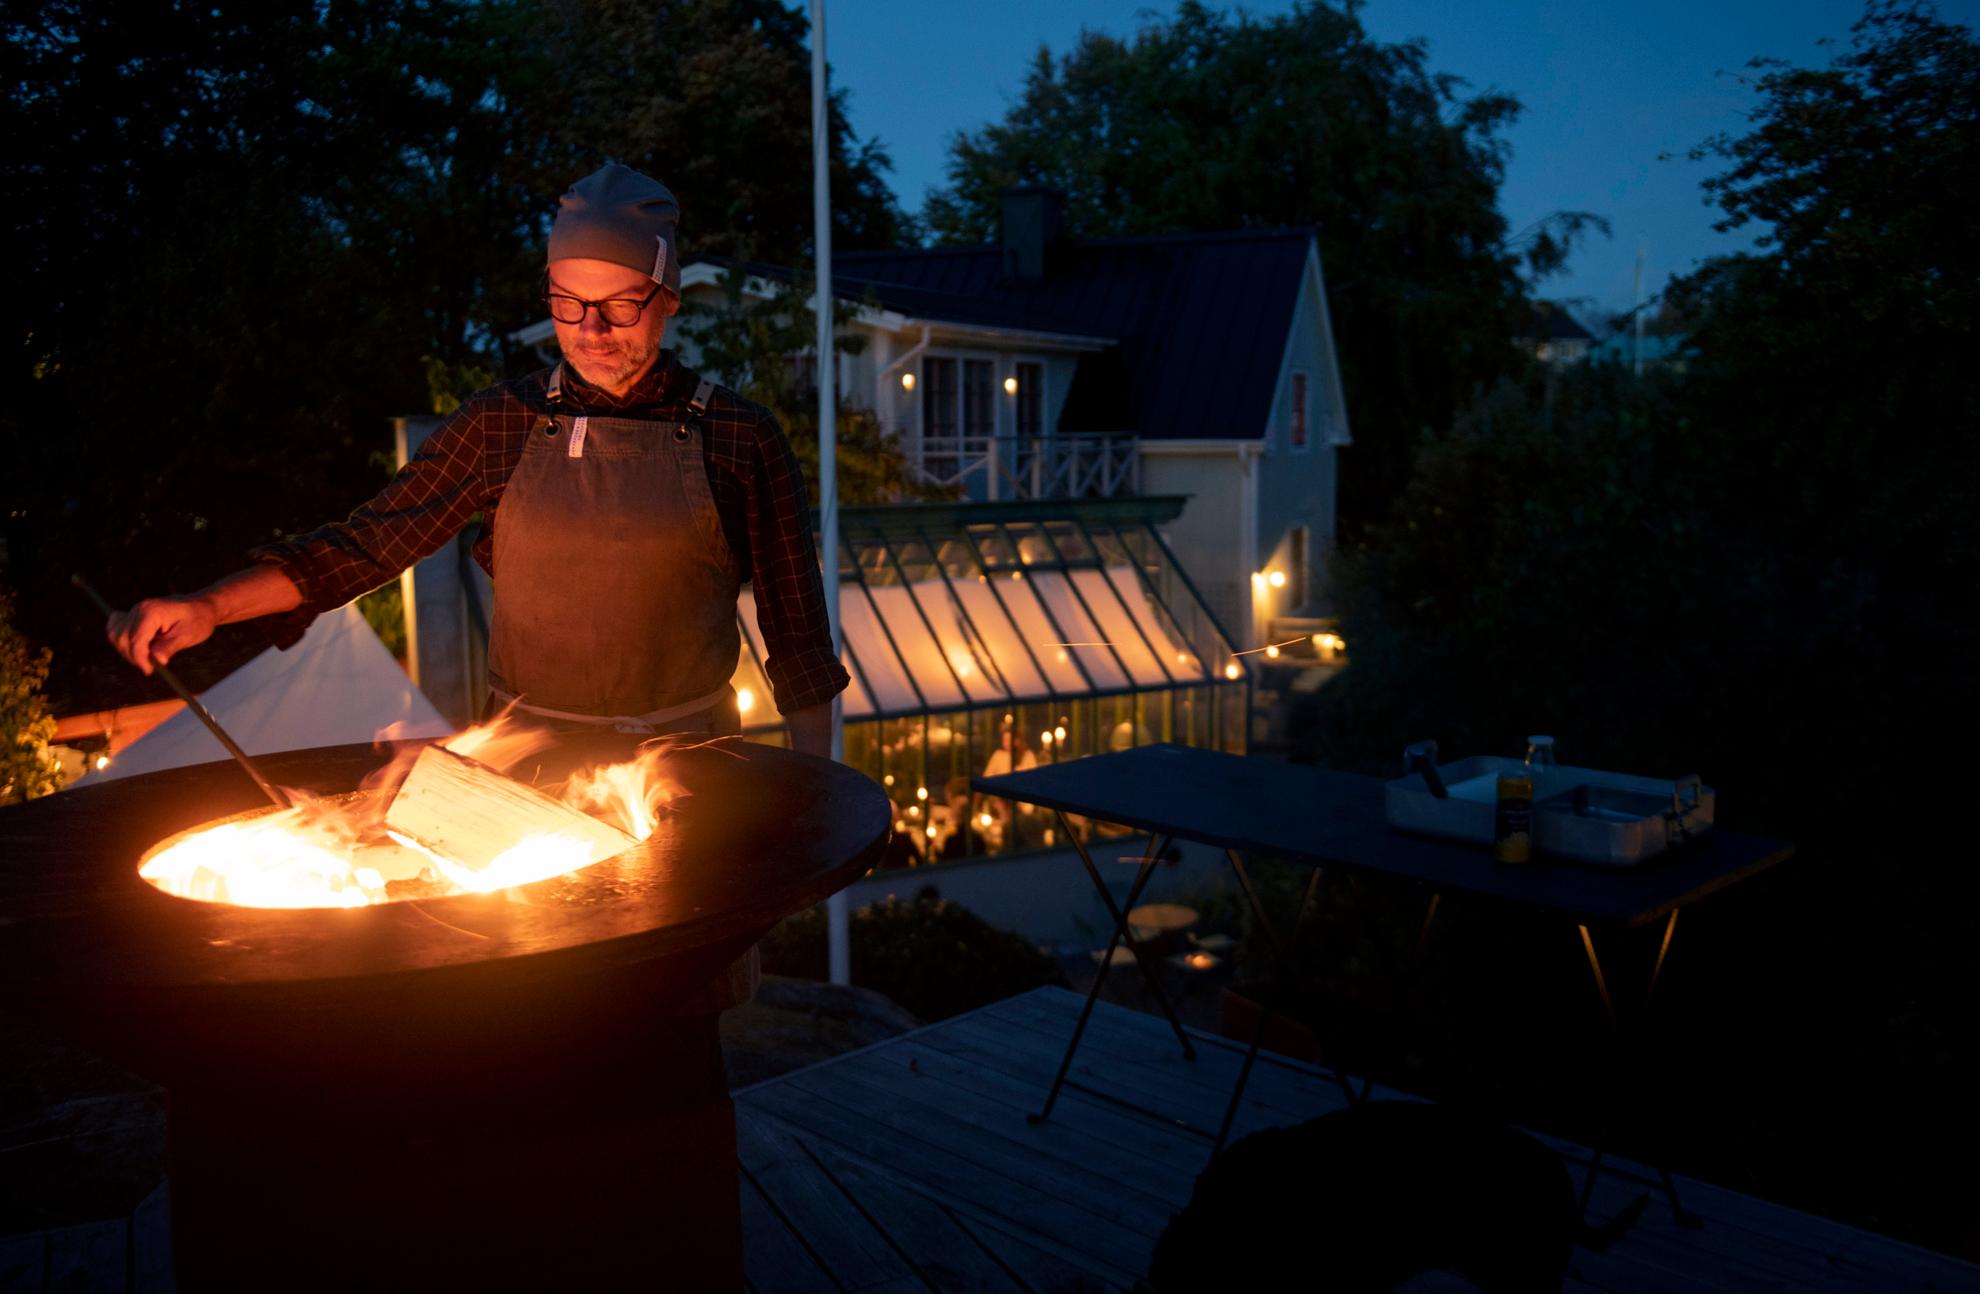 A man with a leather apron is standing by a fire during the evening.